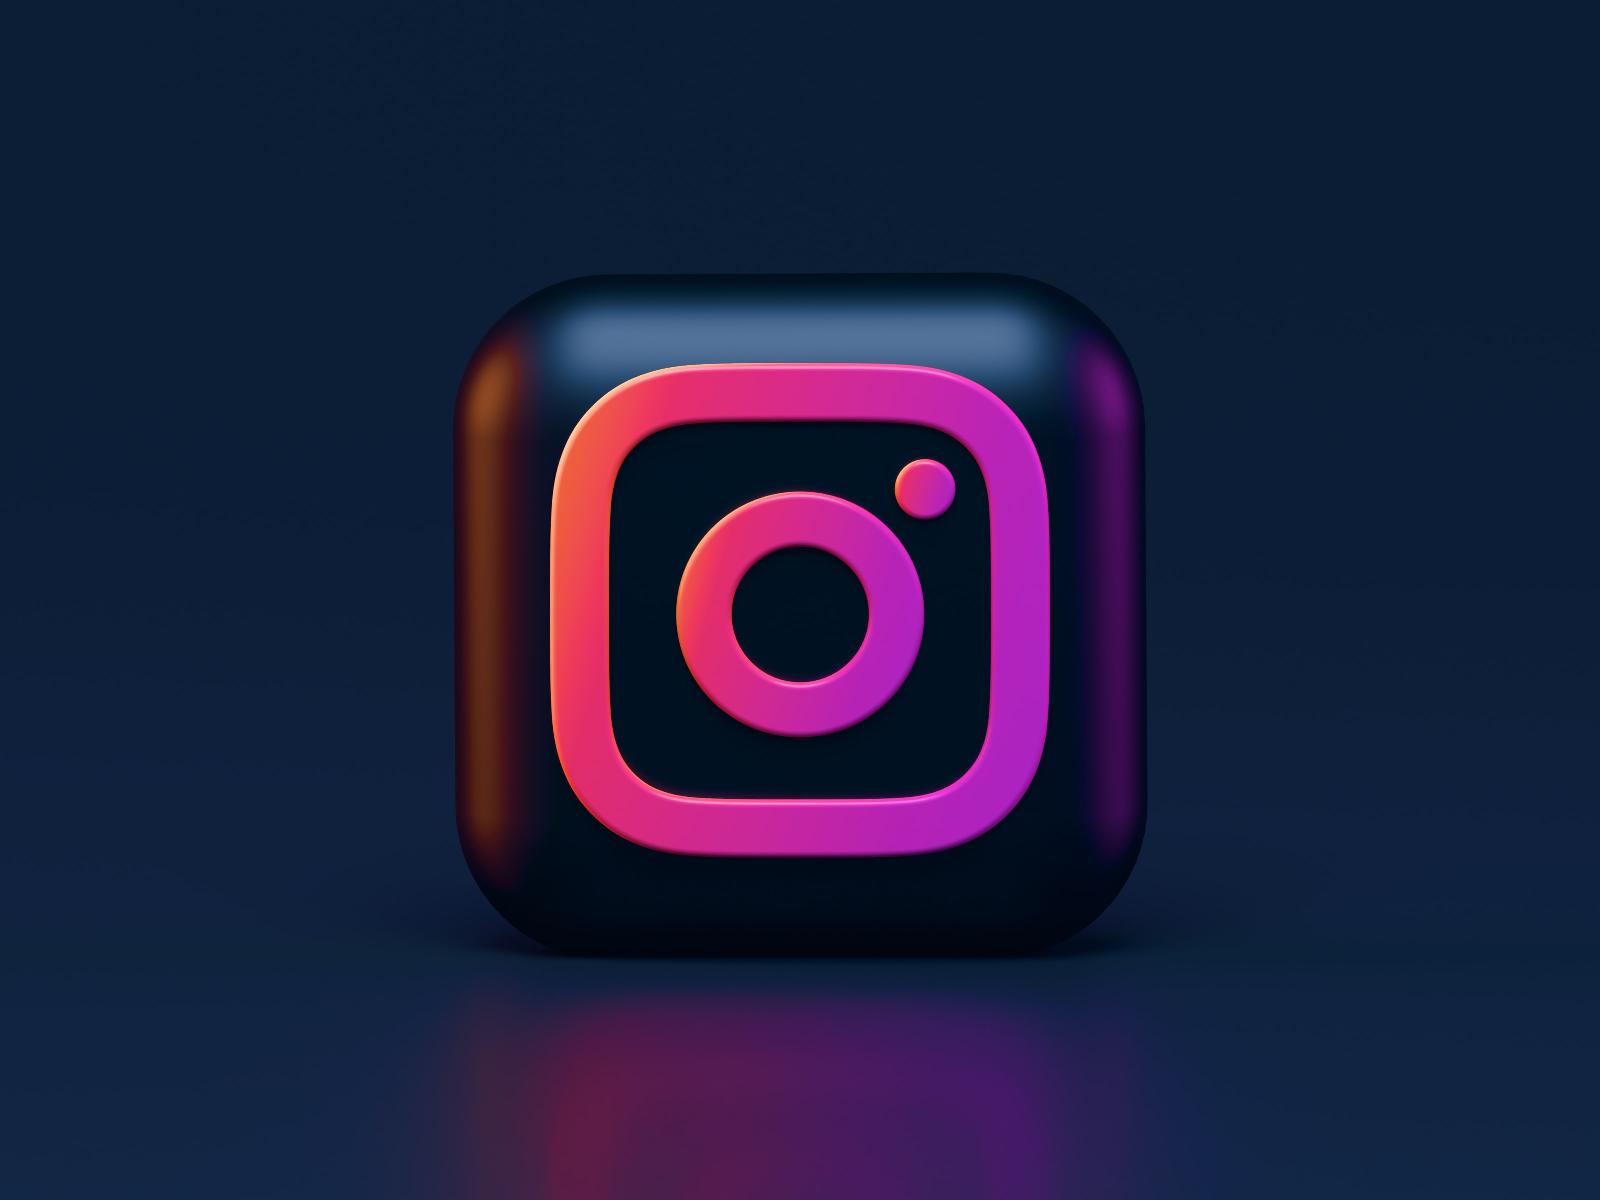 Instagram now finally allows users to download public Reels